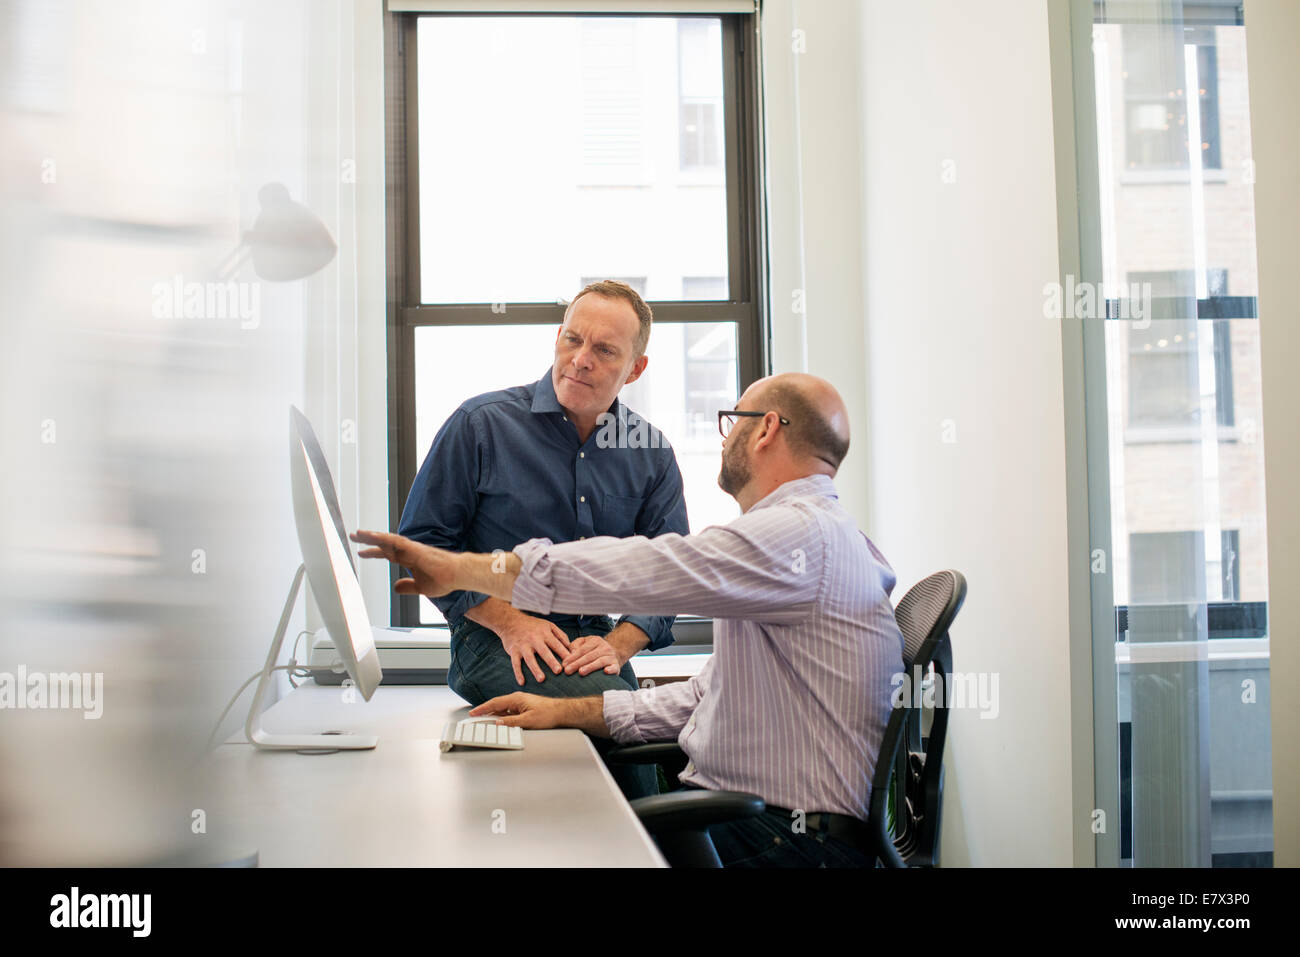 Two business colleagues in an office talking and referring to a computer screen. Stock Photo